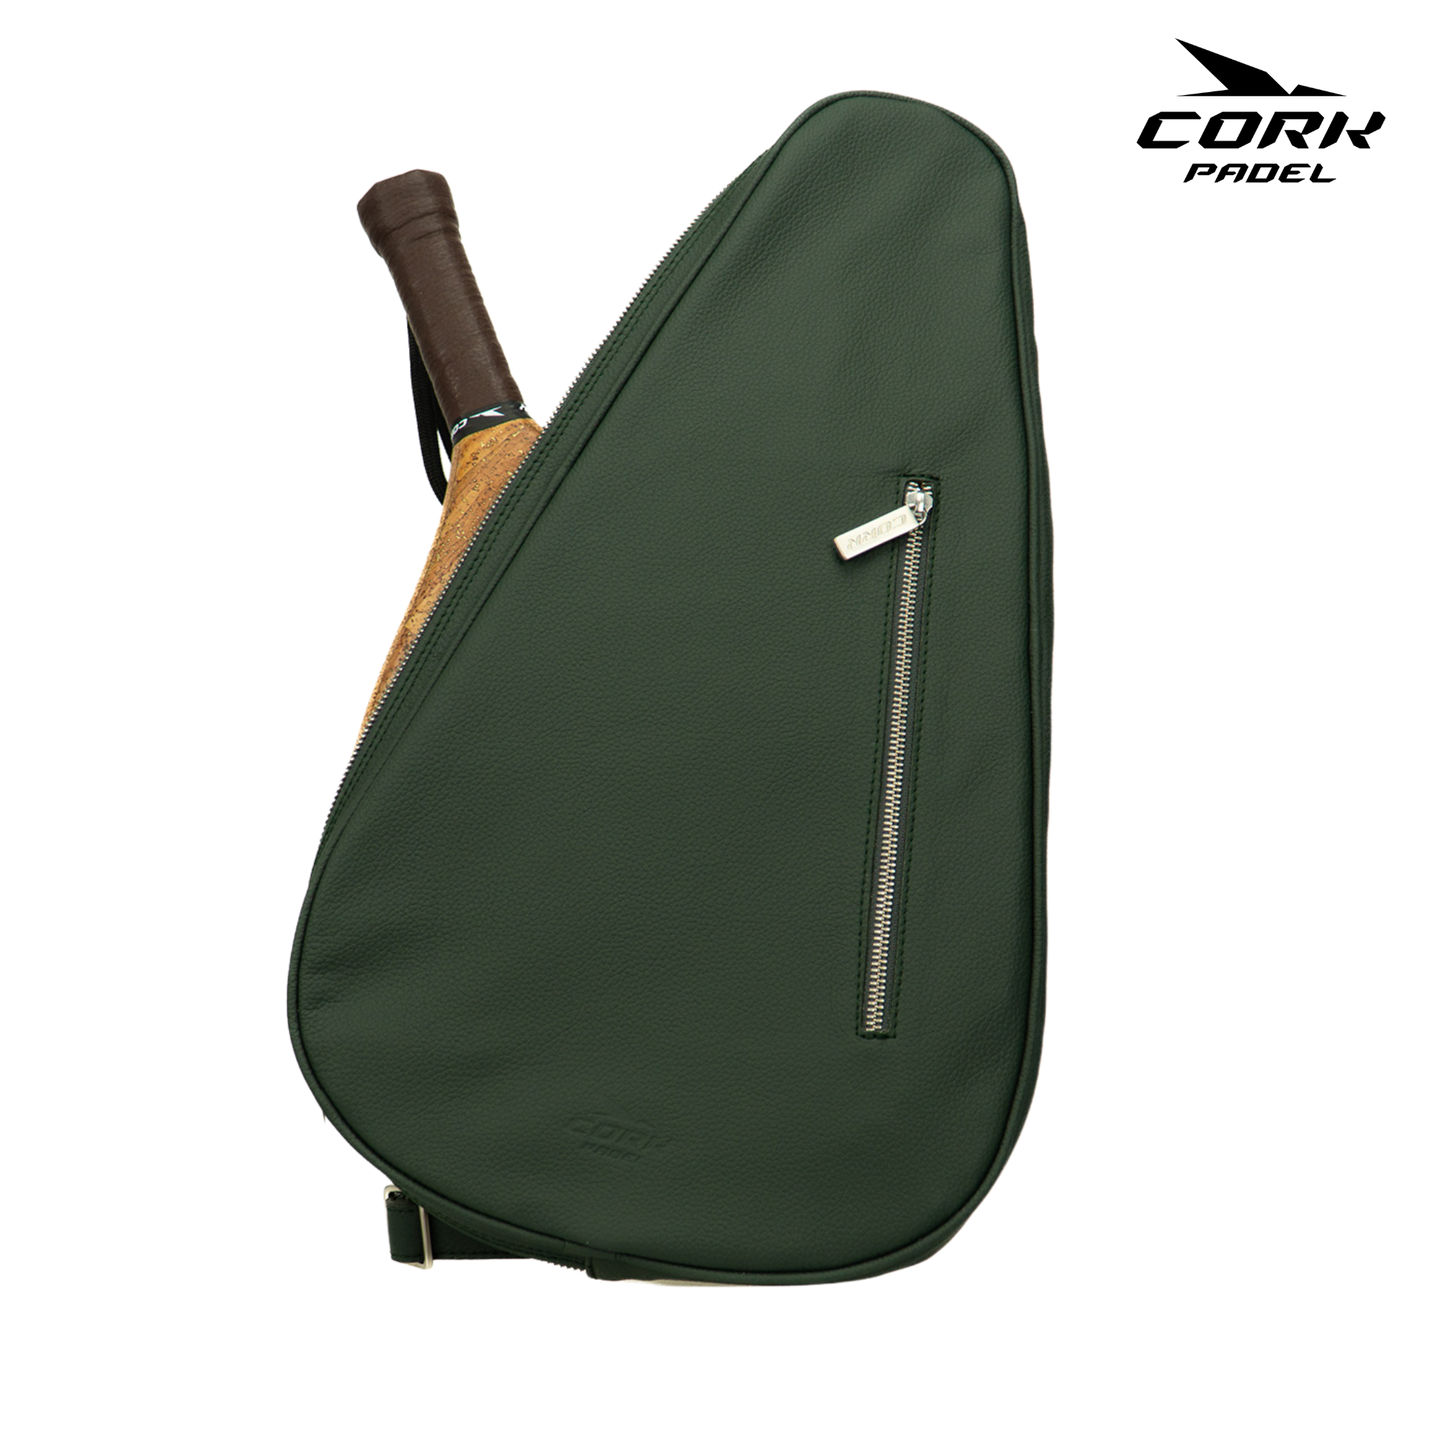 Cork Green Leather Racket Cover Bags Cork   